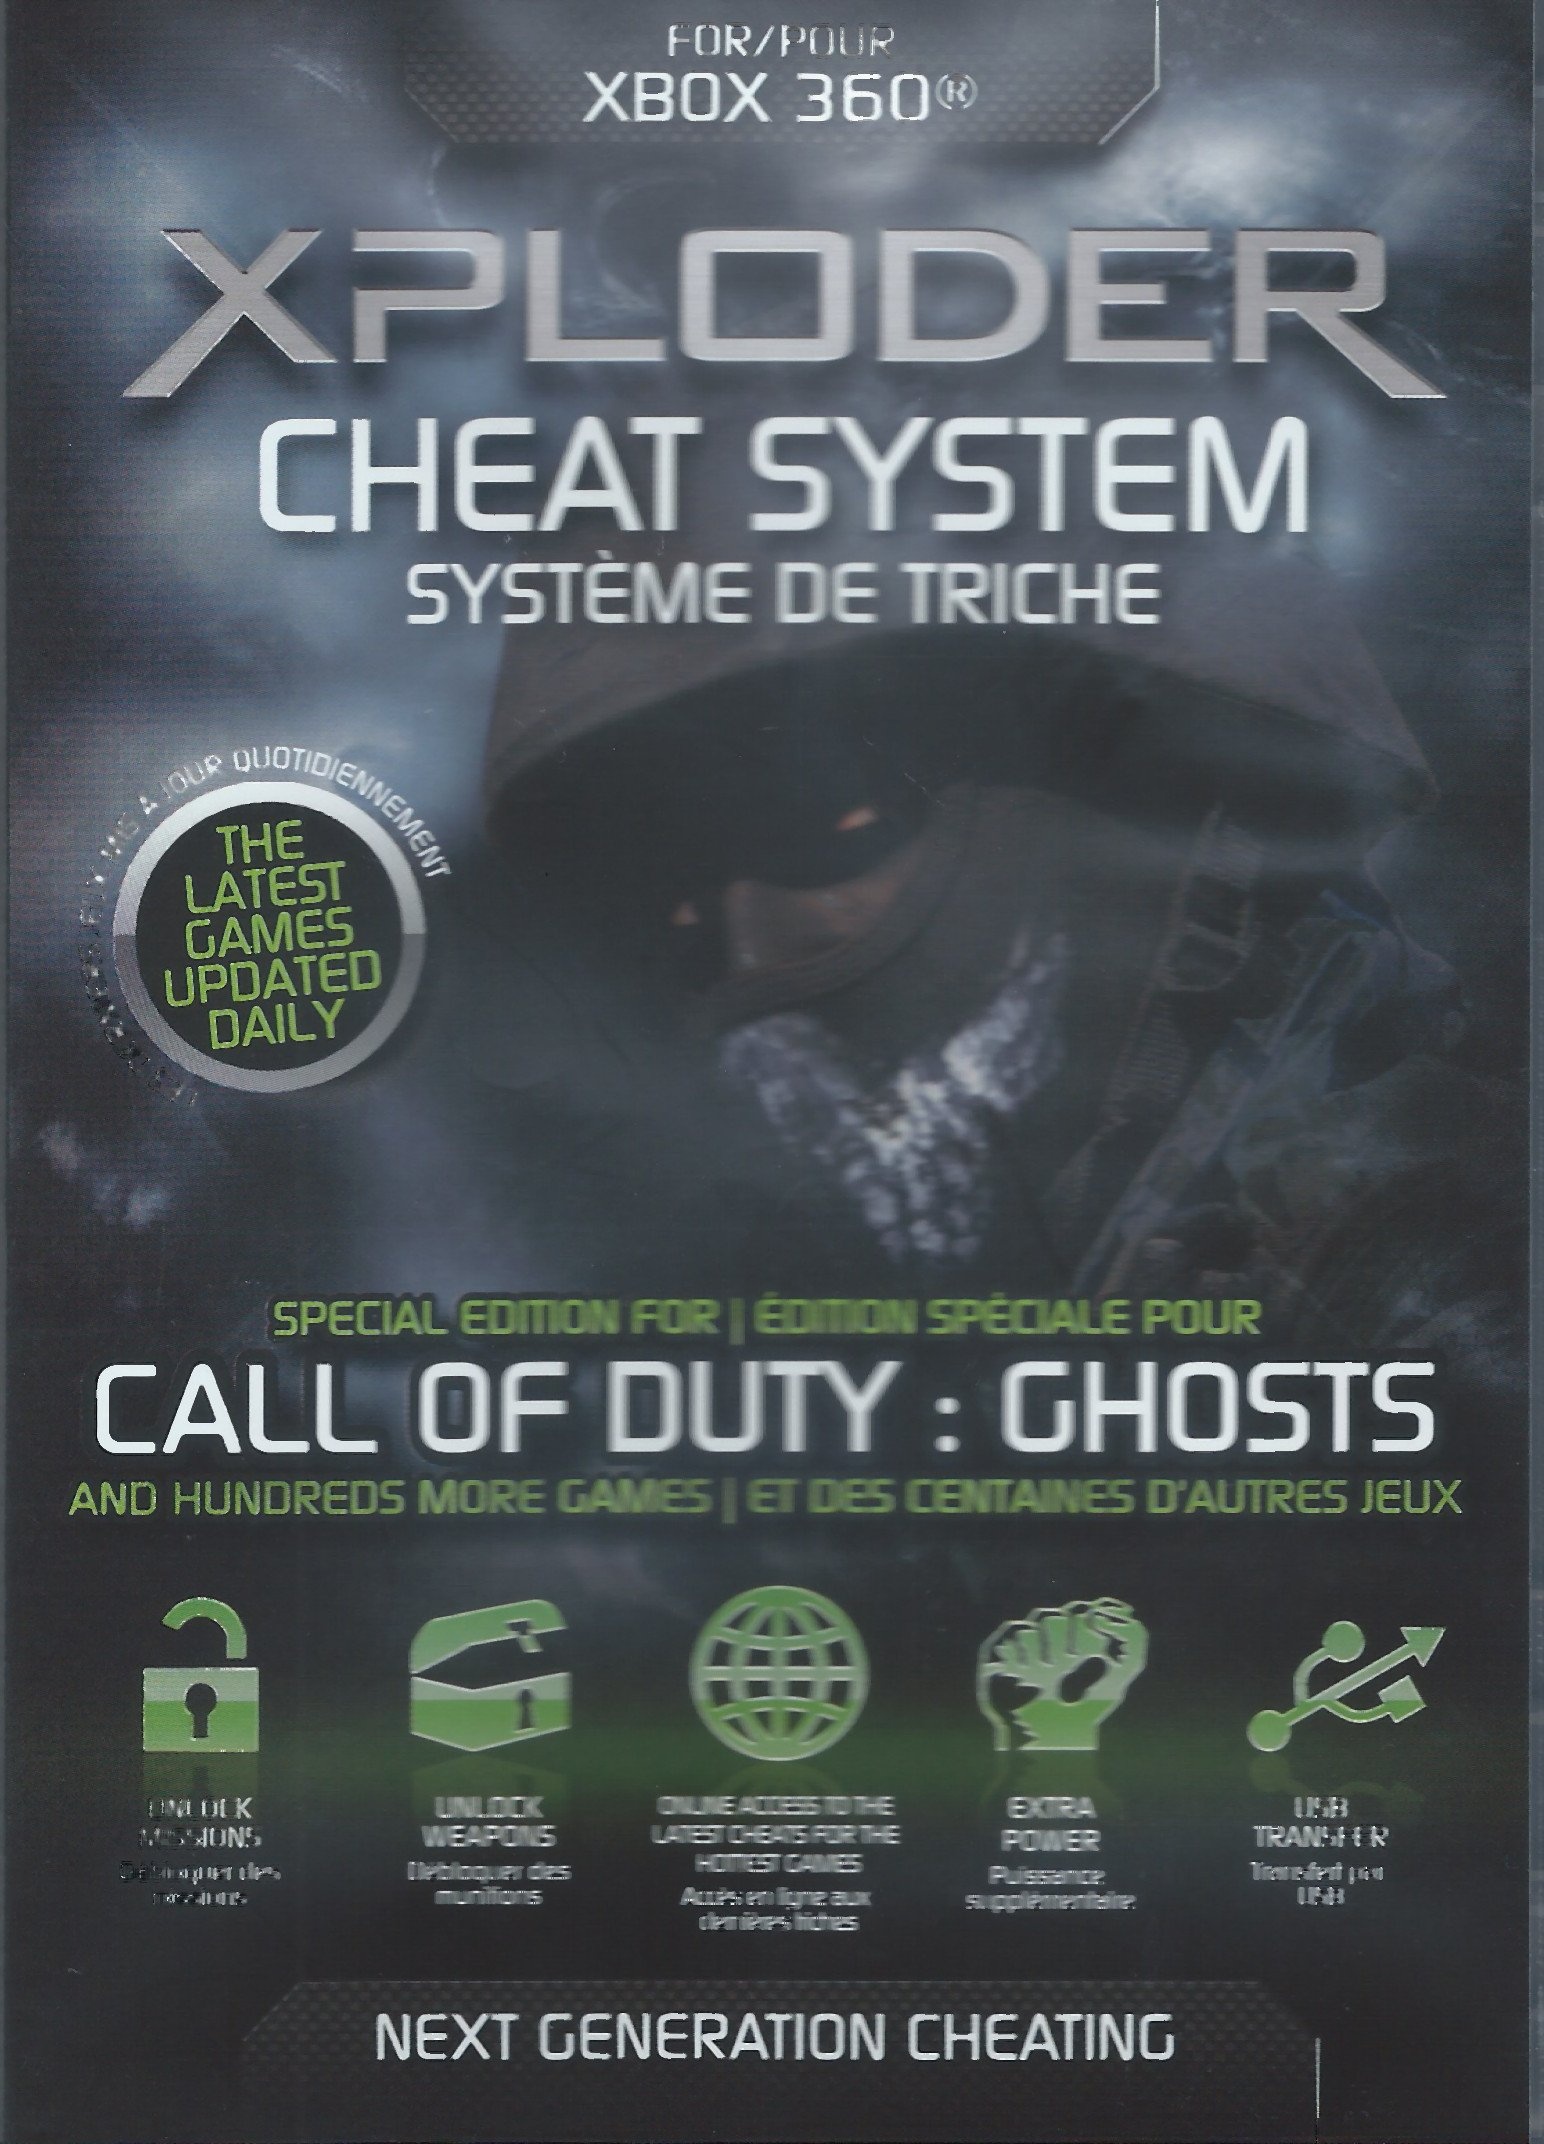 xploder X360 Cheat System Call of Duty: Ghosts Edition (Eu)